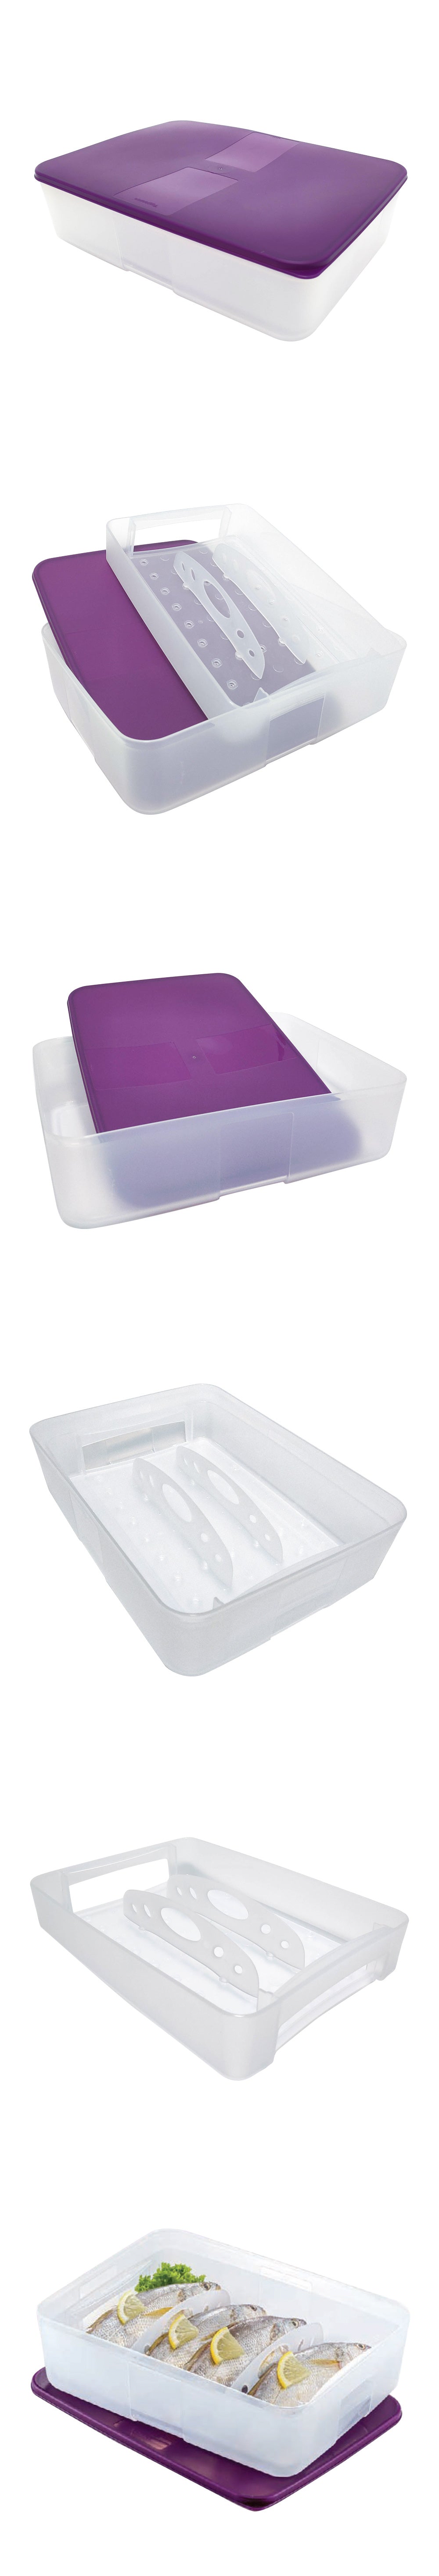 Tupperware FreezerMate Large II (1) 3.1L with Tray